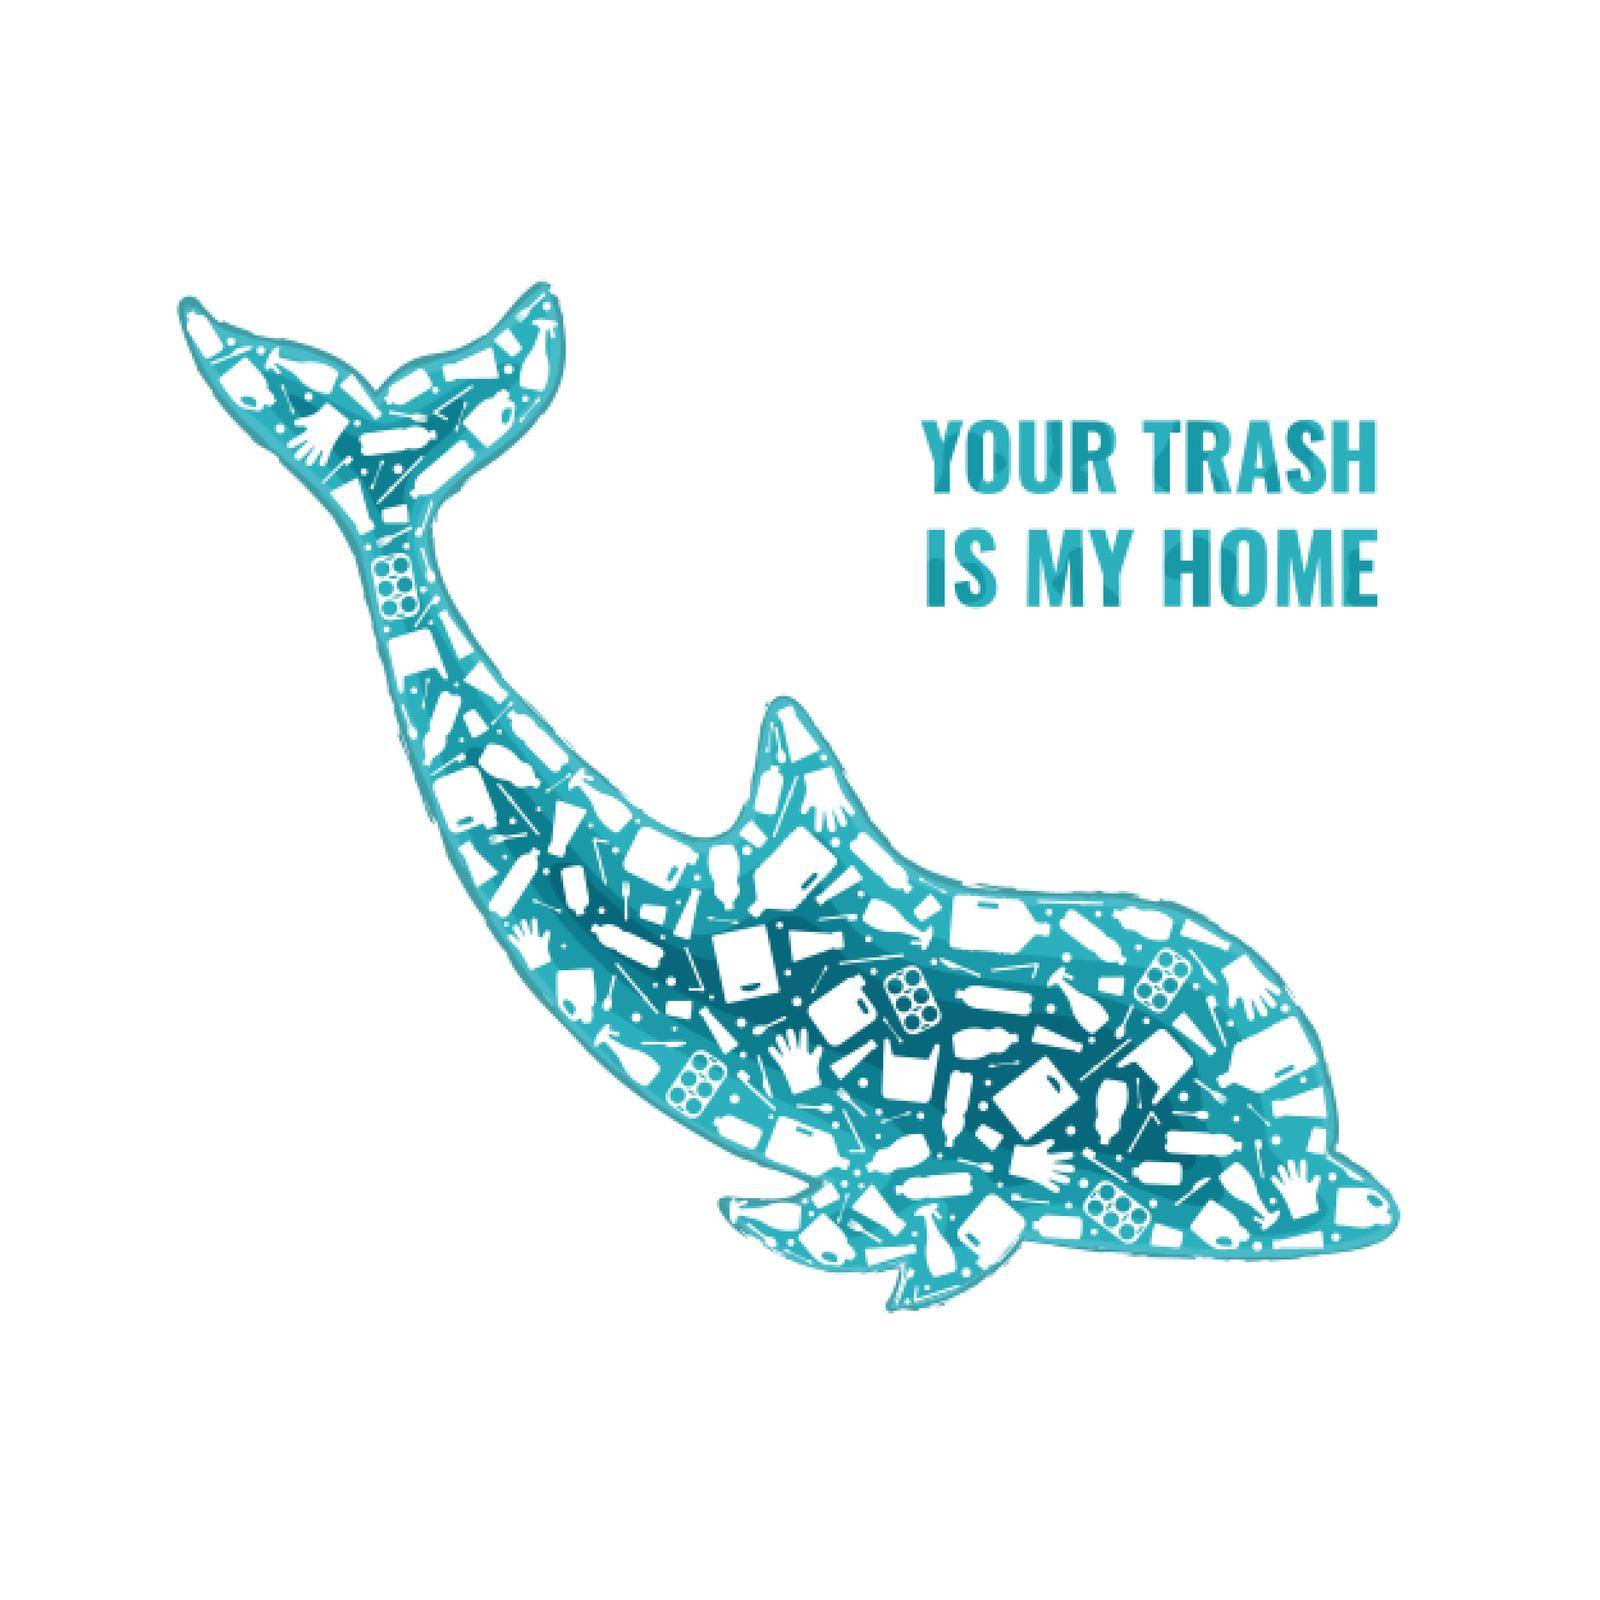 Plastic waste ocean environment problem concept vector llustration. Dolphin marine mammal silhouette filled with plastic garbage flat icons. Microplastic pollution problem, single use plastic crisis.